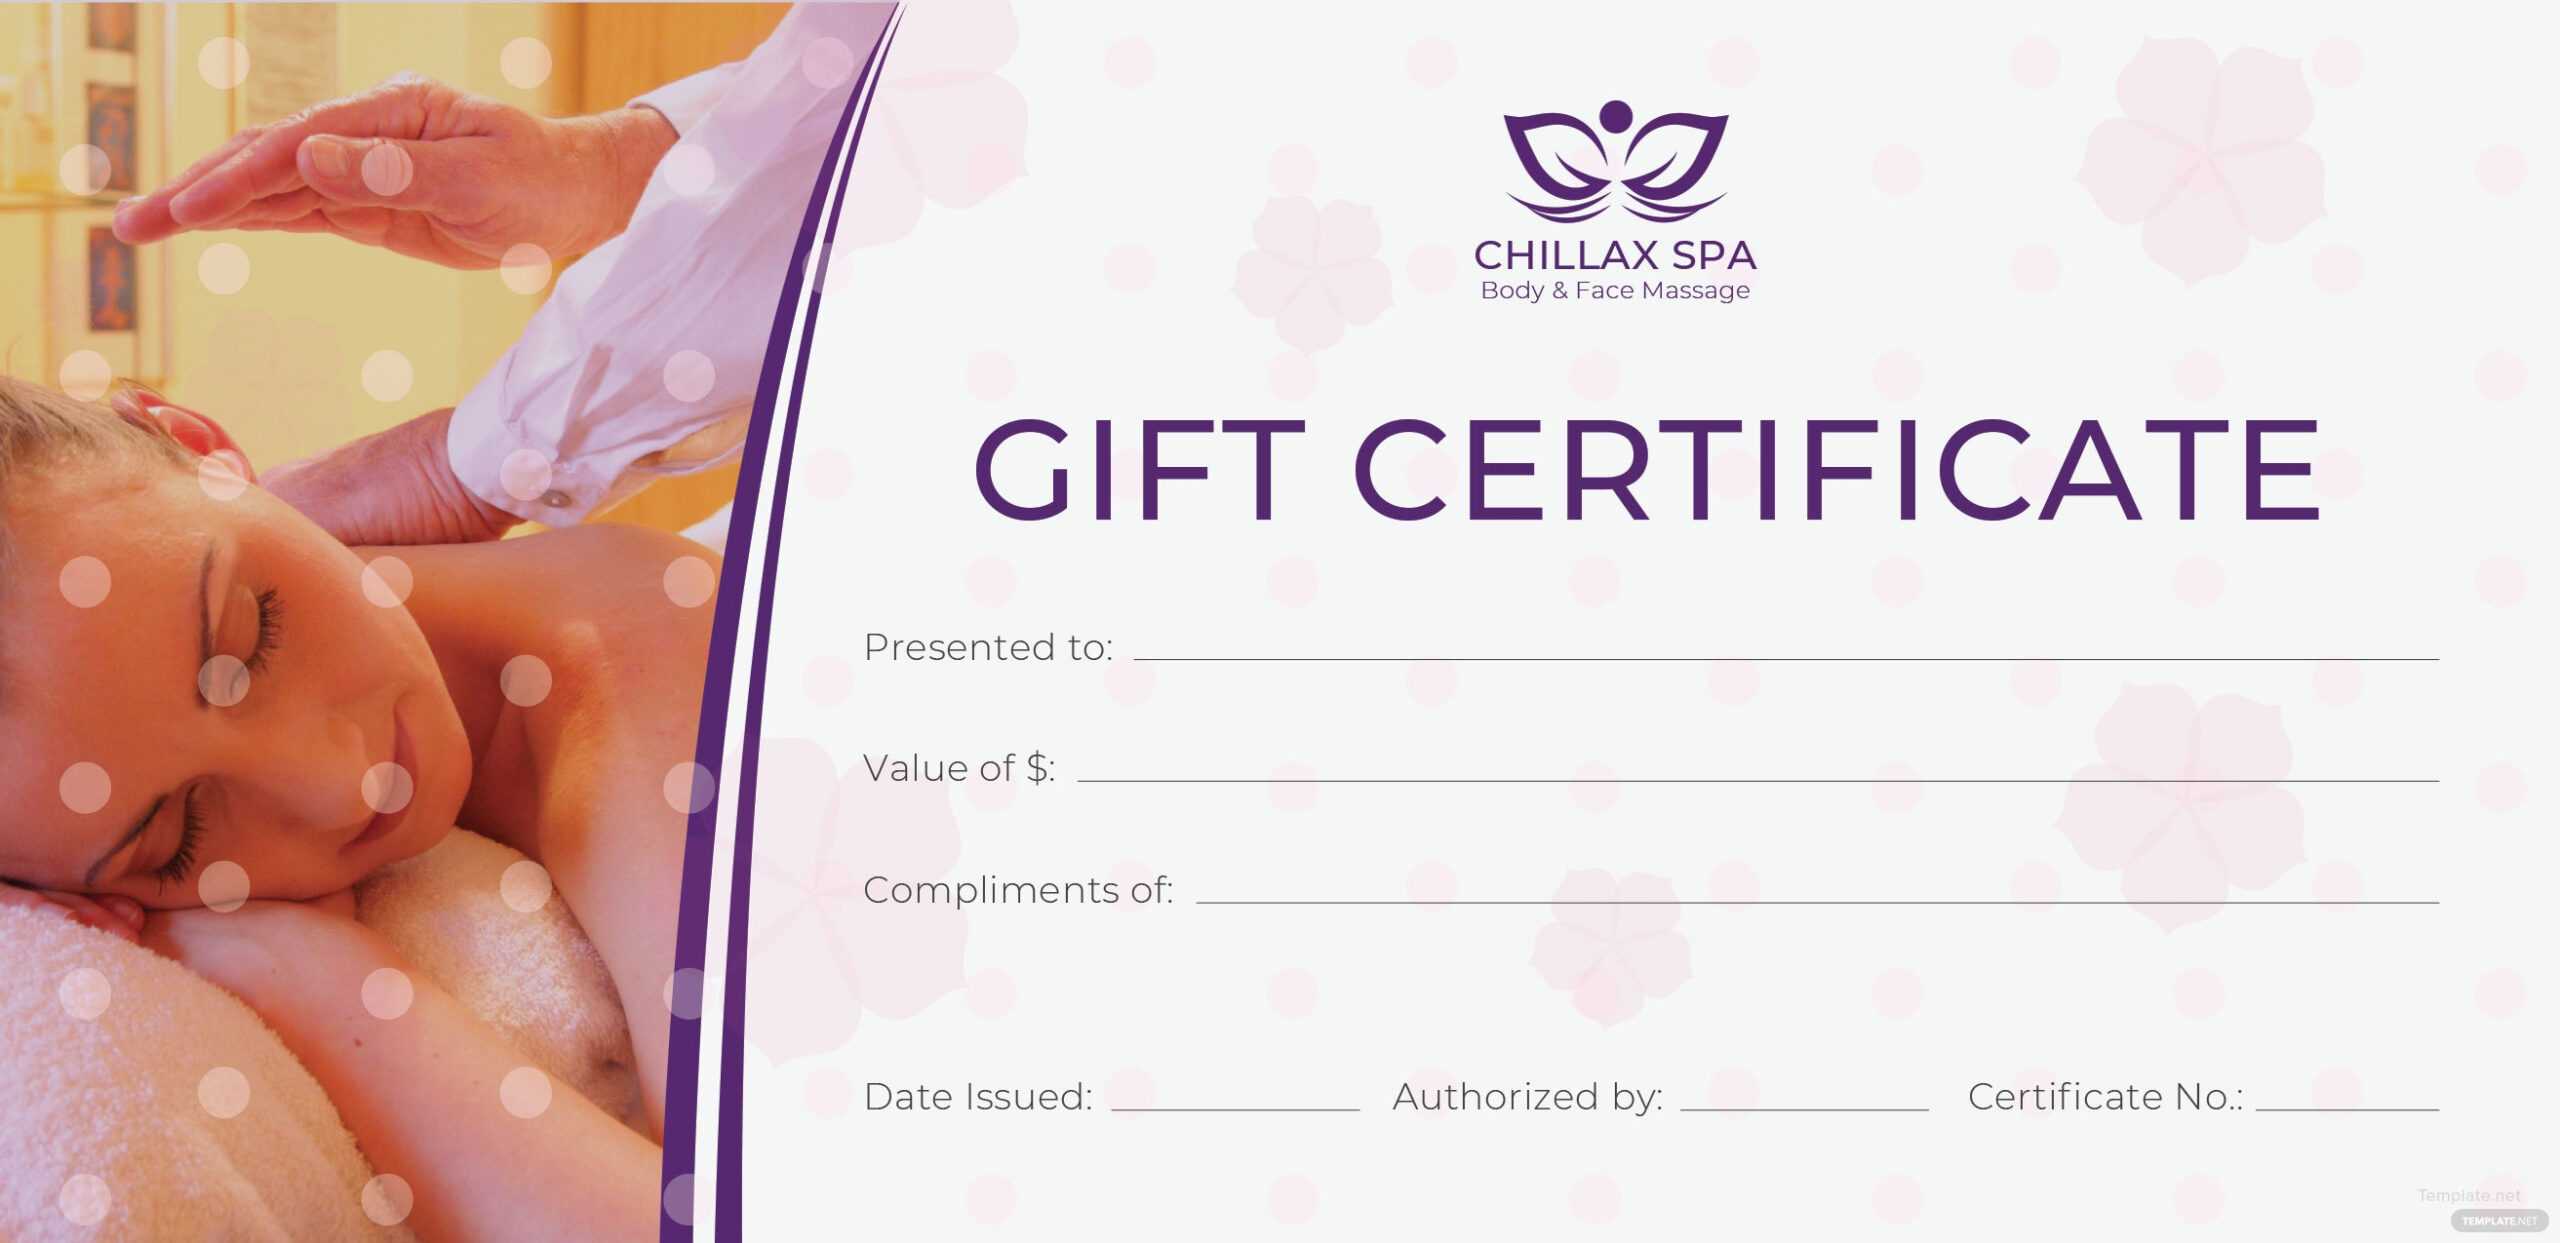 Massage Gift Certificate Template Free Printable Massage Within Massage Gift Certificate Template Free Printable